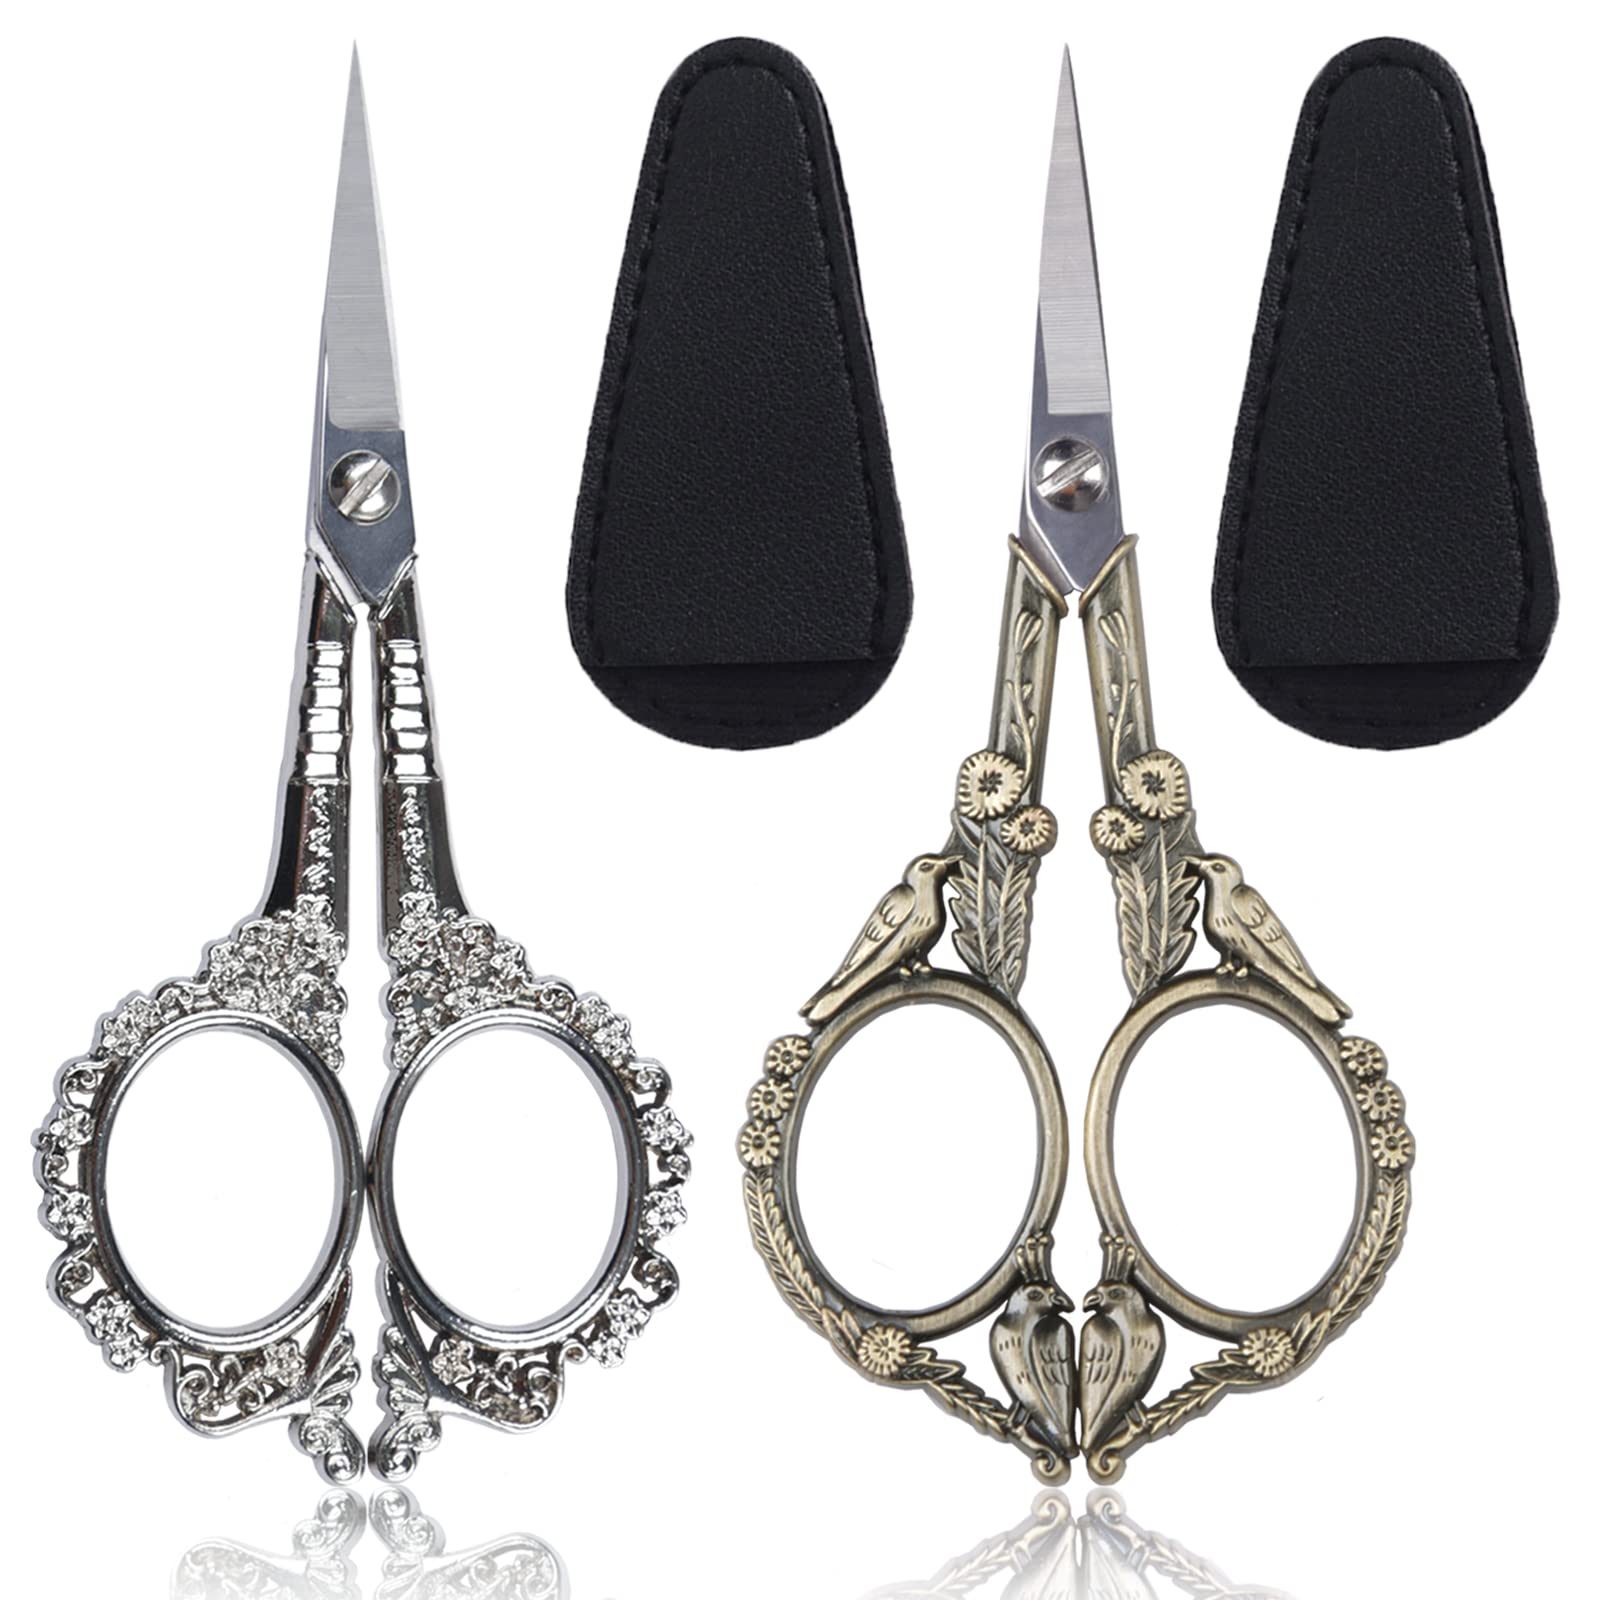 2pcs Vintage Stainless Steel Cuticle Precision Embroidery Scissors Beauty  Grooming for Nail, Facial Hair, Eyebrow, Eyelash, Nose Hair, Moustache,  Manicure Crochet Threading Tool Silver-bronze